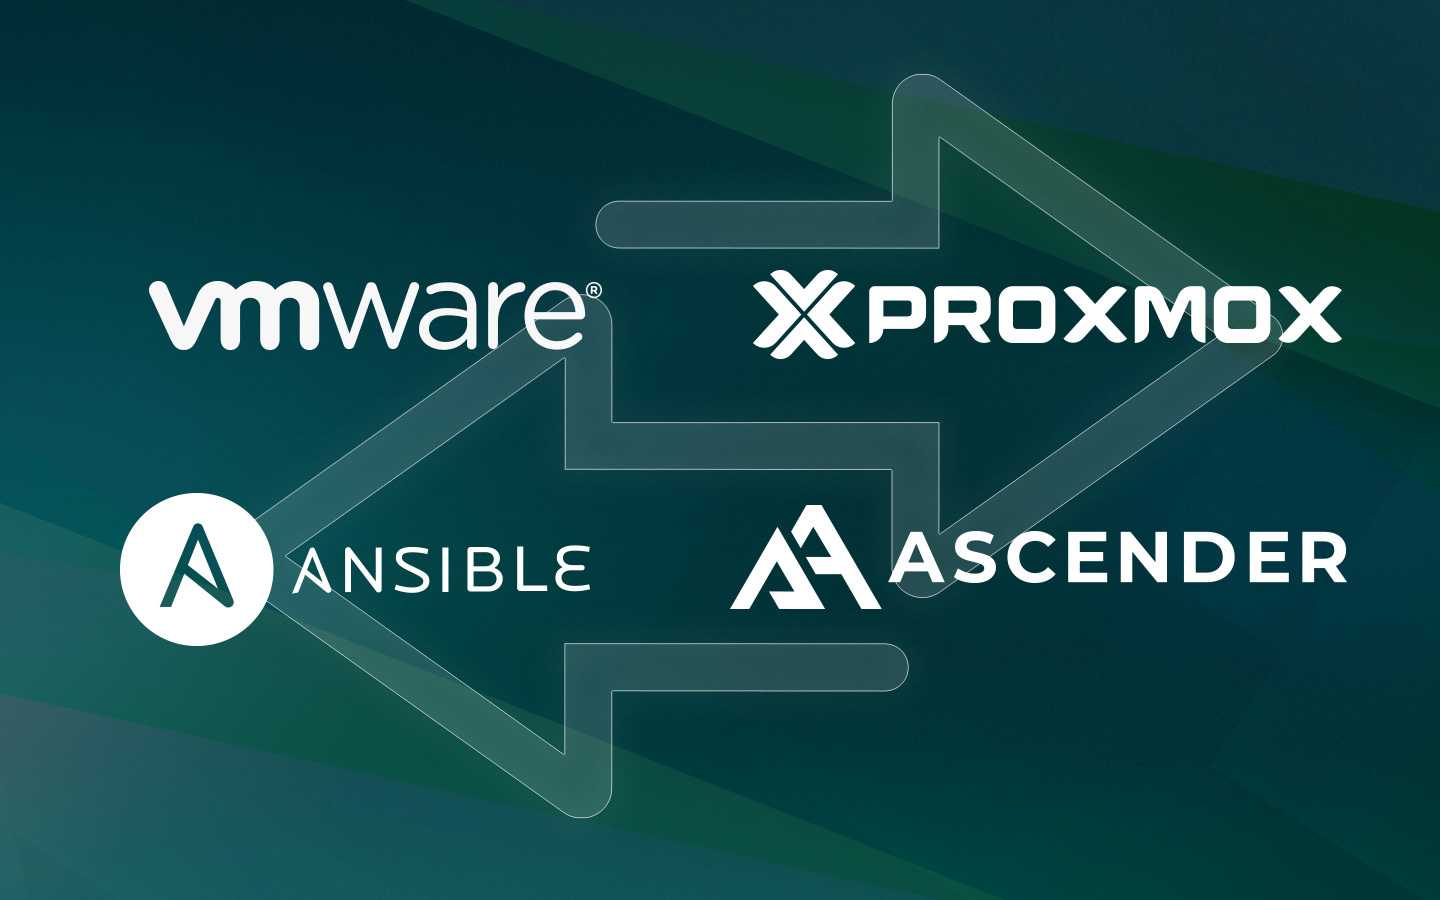 VMware to Proxmox VE Migration via Ansible and Ascender